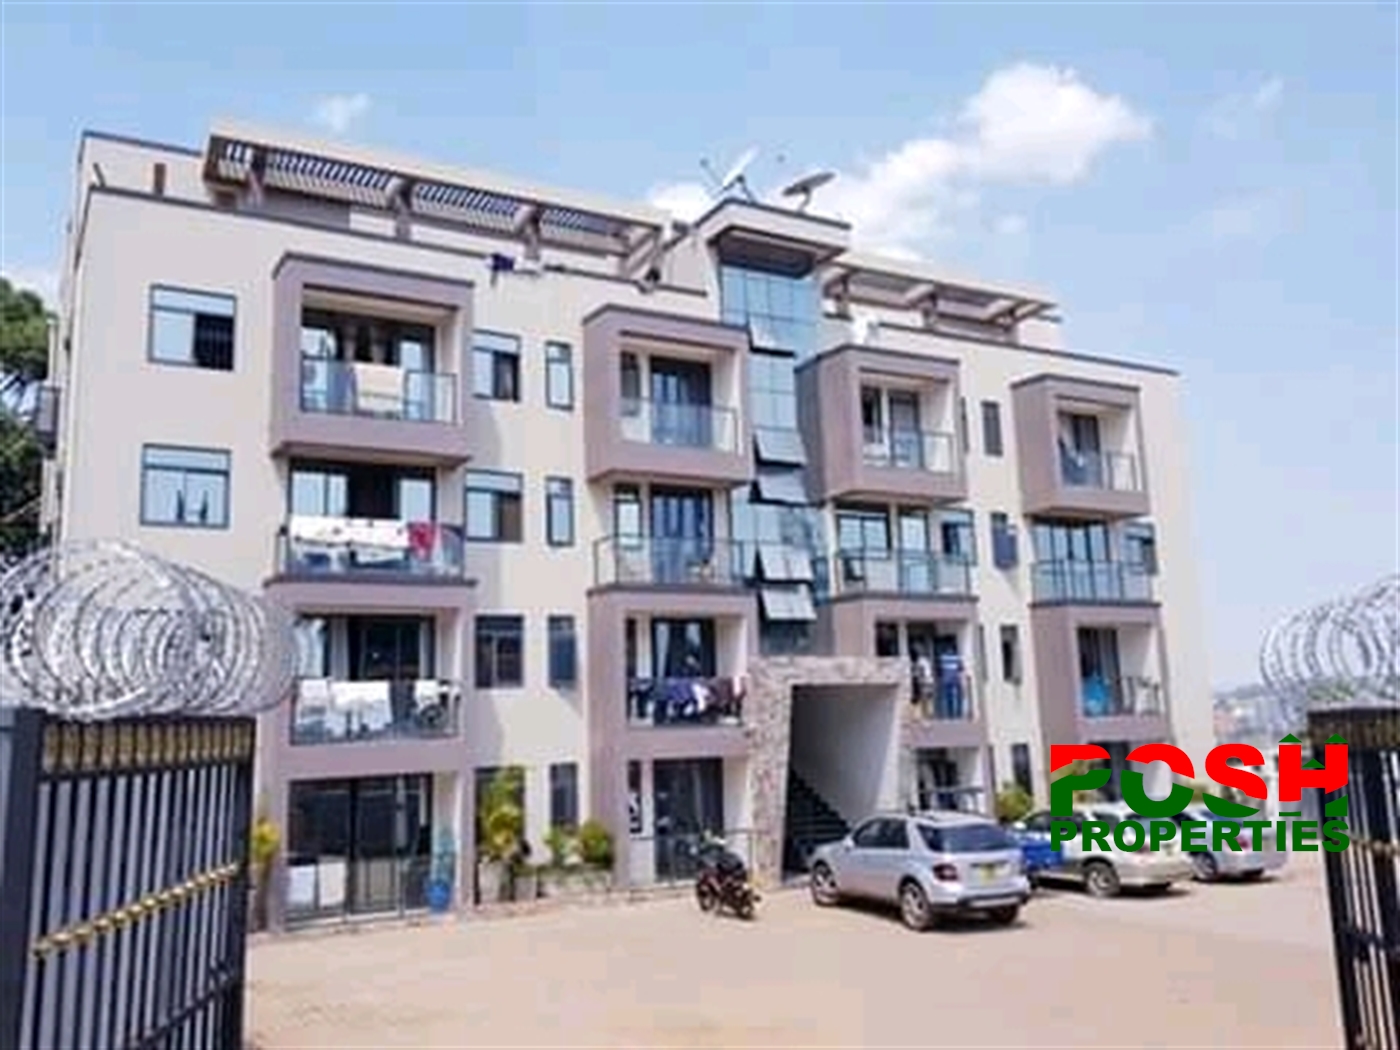 Apartment block for sale in Kampalacentral Kampala